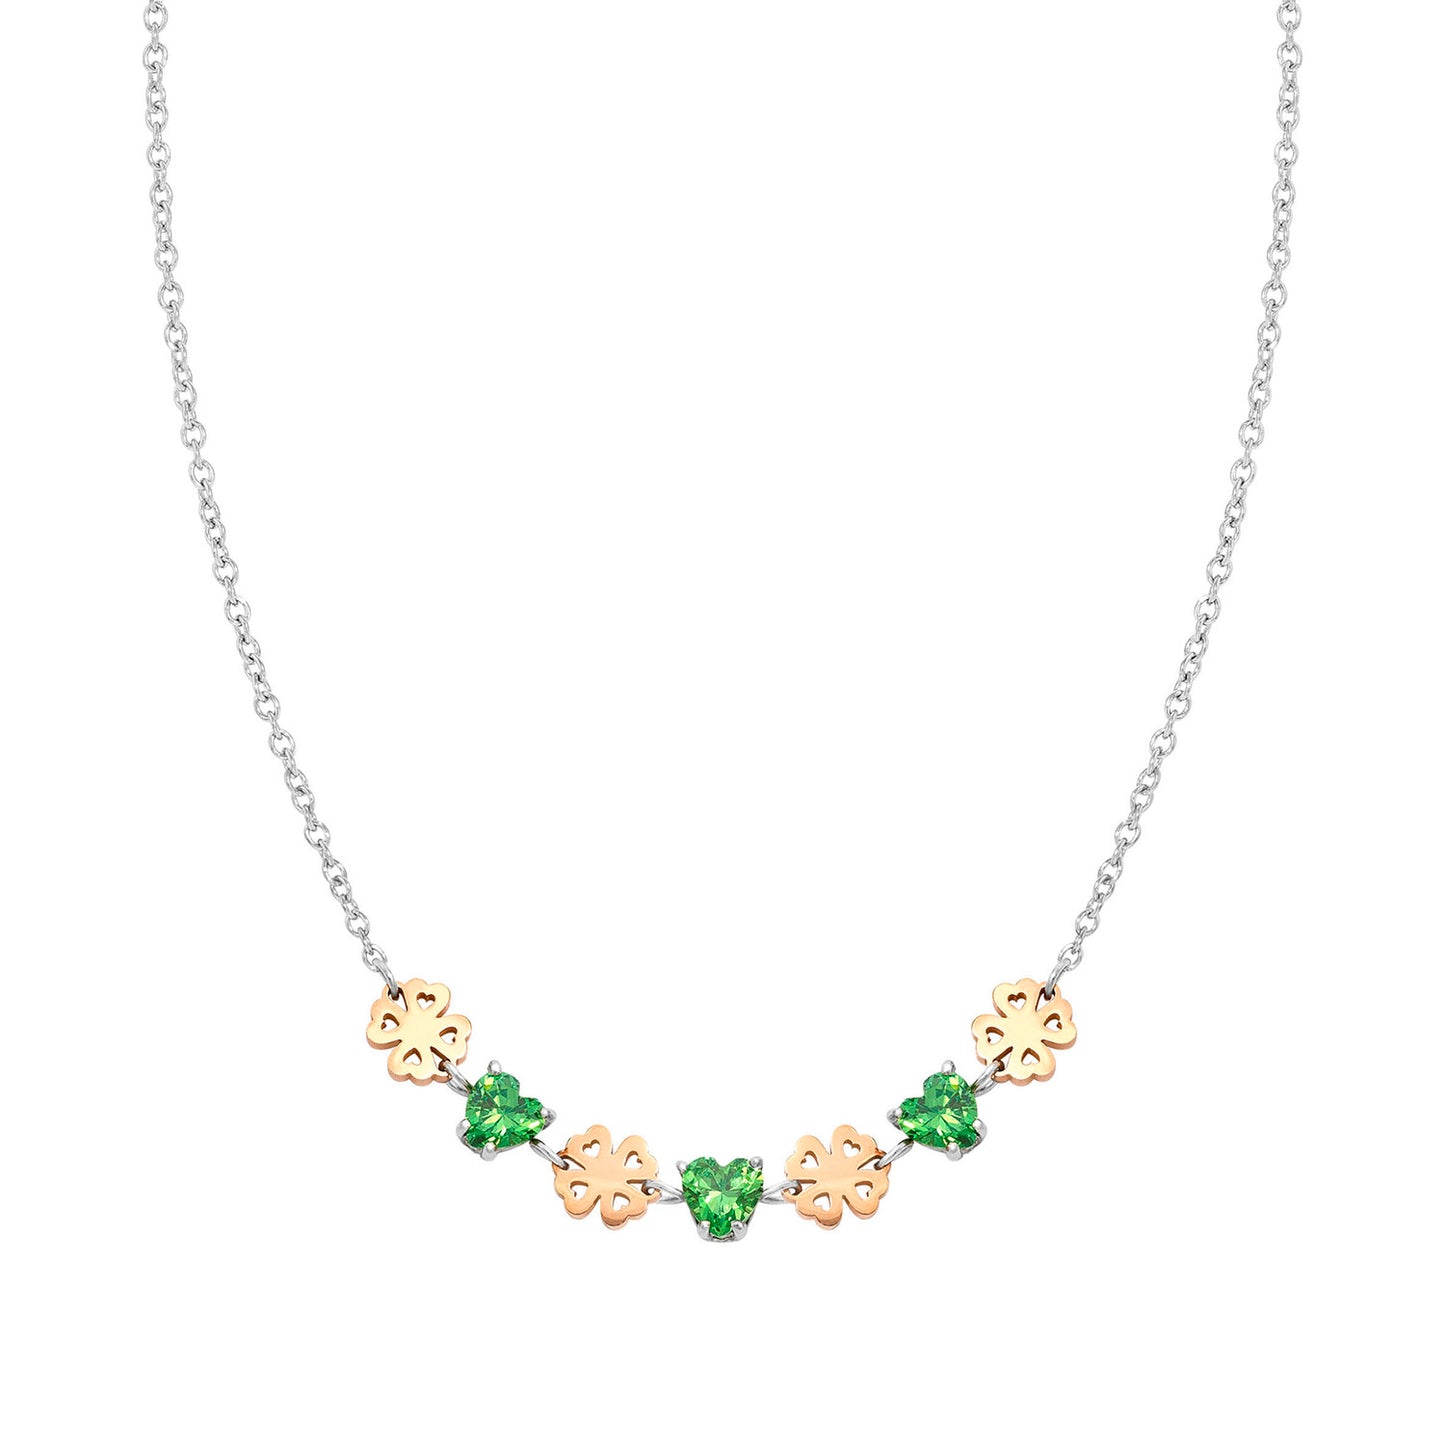 029601/006 PRINCIPESSINA necklace in steel with BI-TONE fin, and cubic zirconia (006_four-leaf clover)